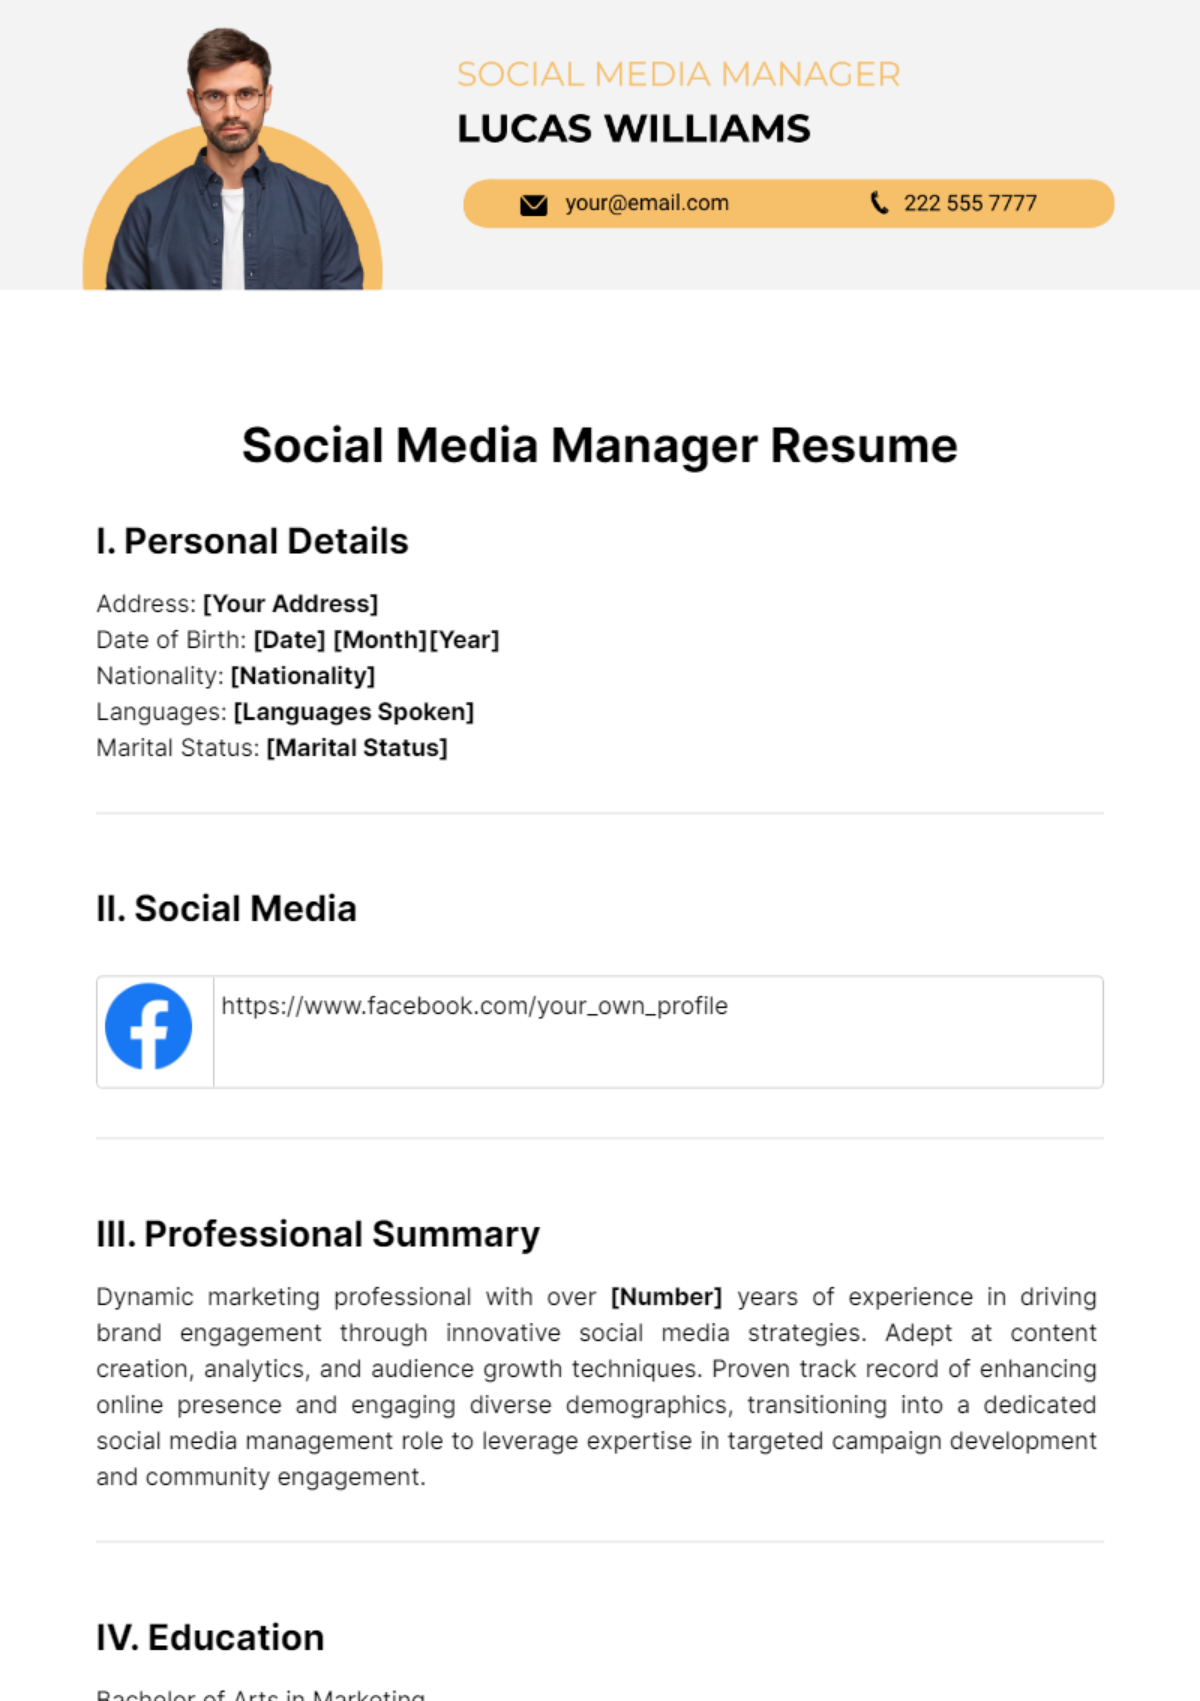 Social Media Manager Resume Template